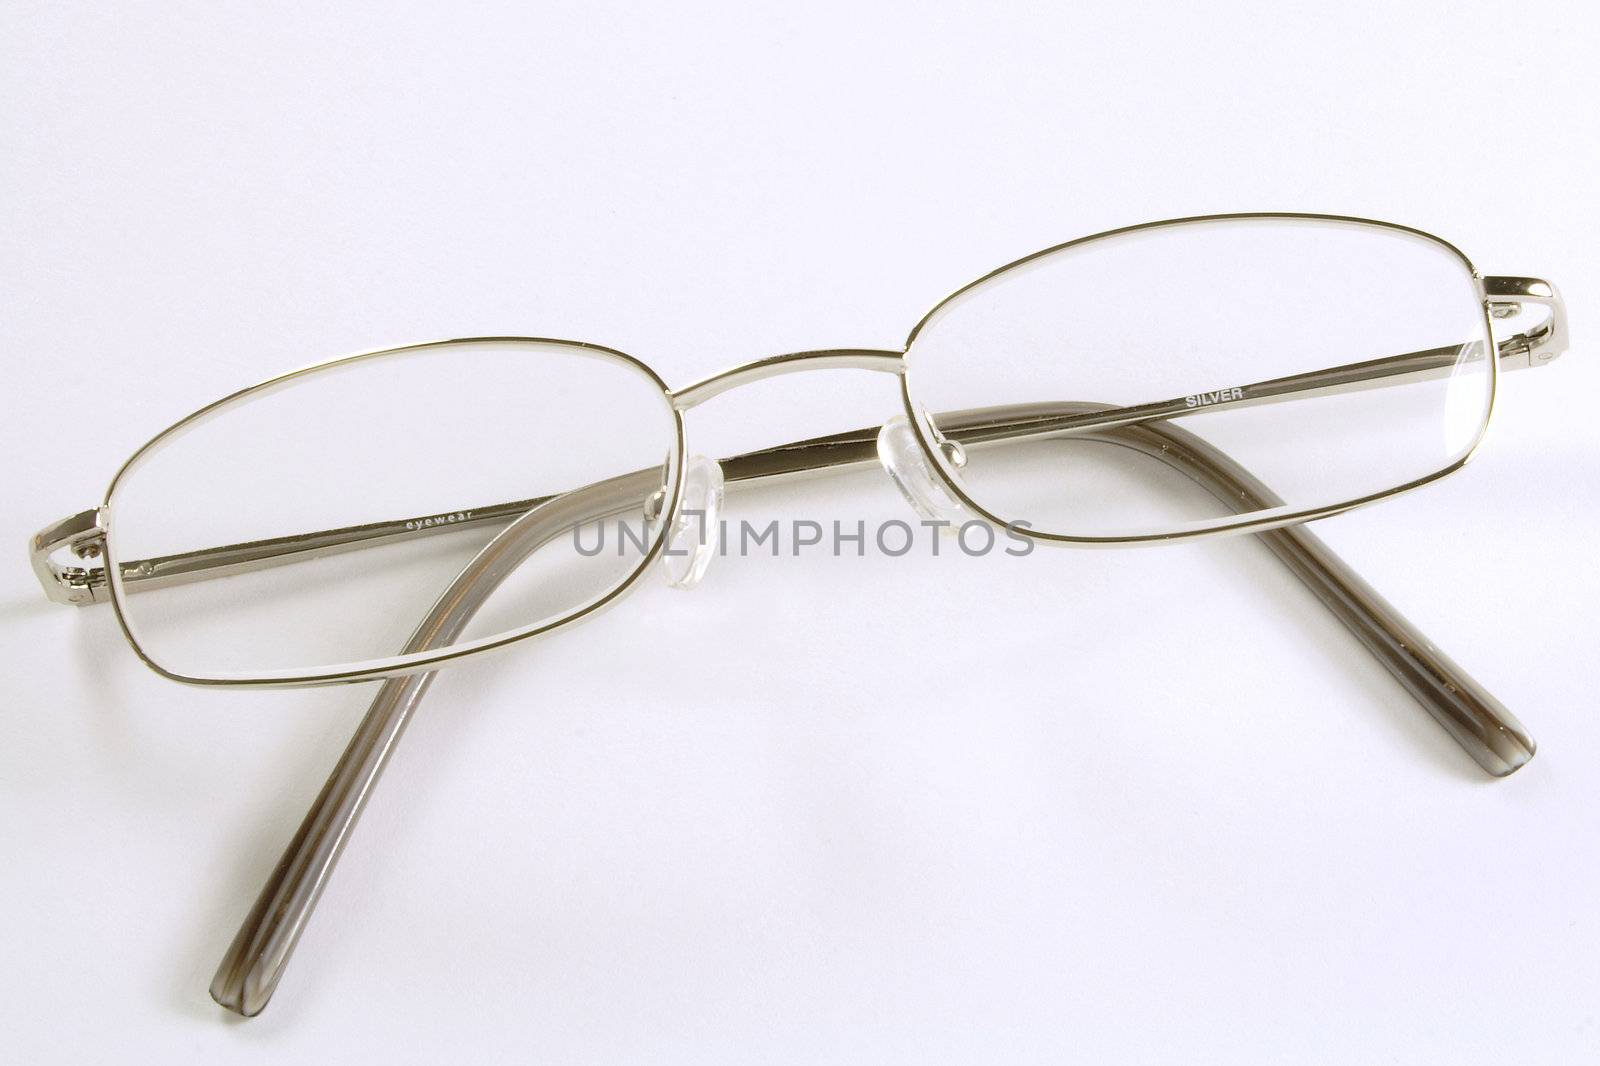 silver rimmed spectacles by leafy